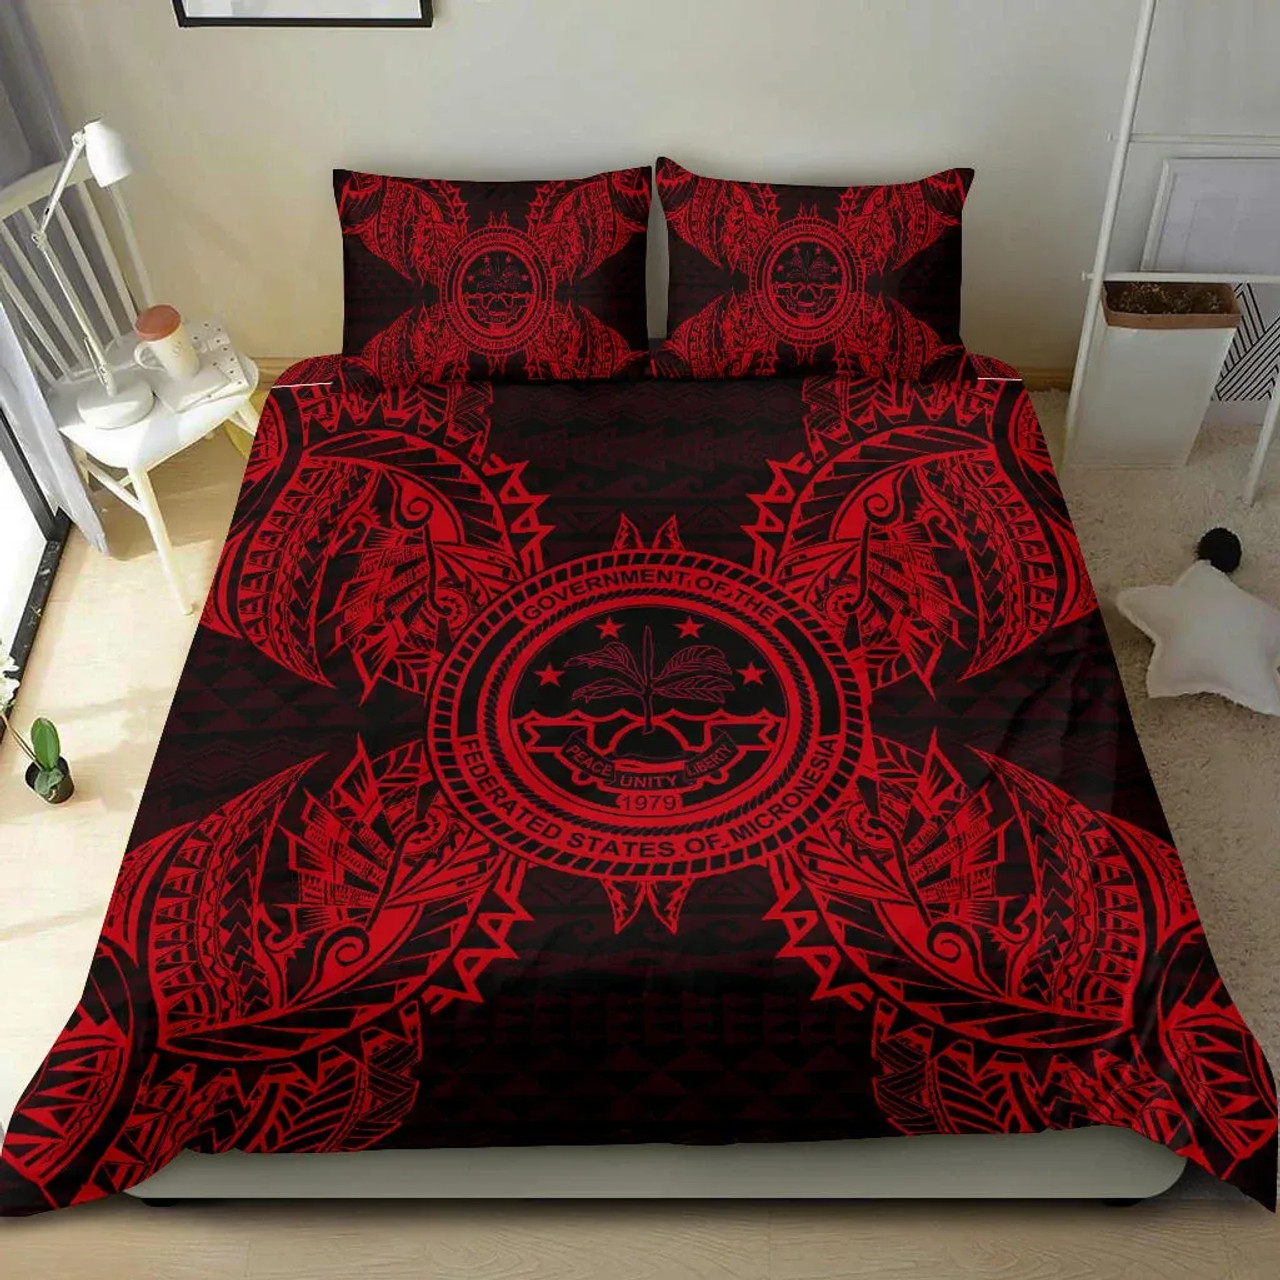 Polynesian Bedding Set - Federated States Of Micronesian Duvet Cover Set Map Red 2